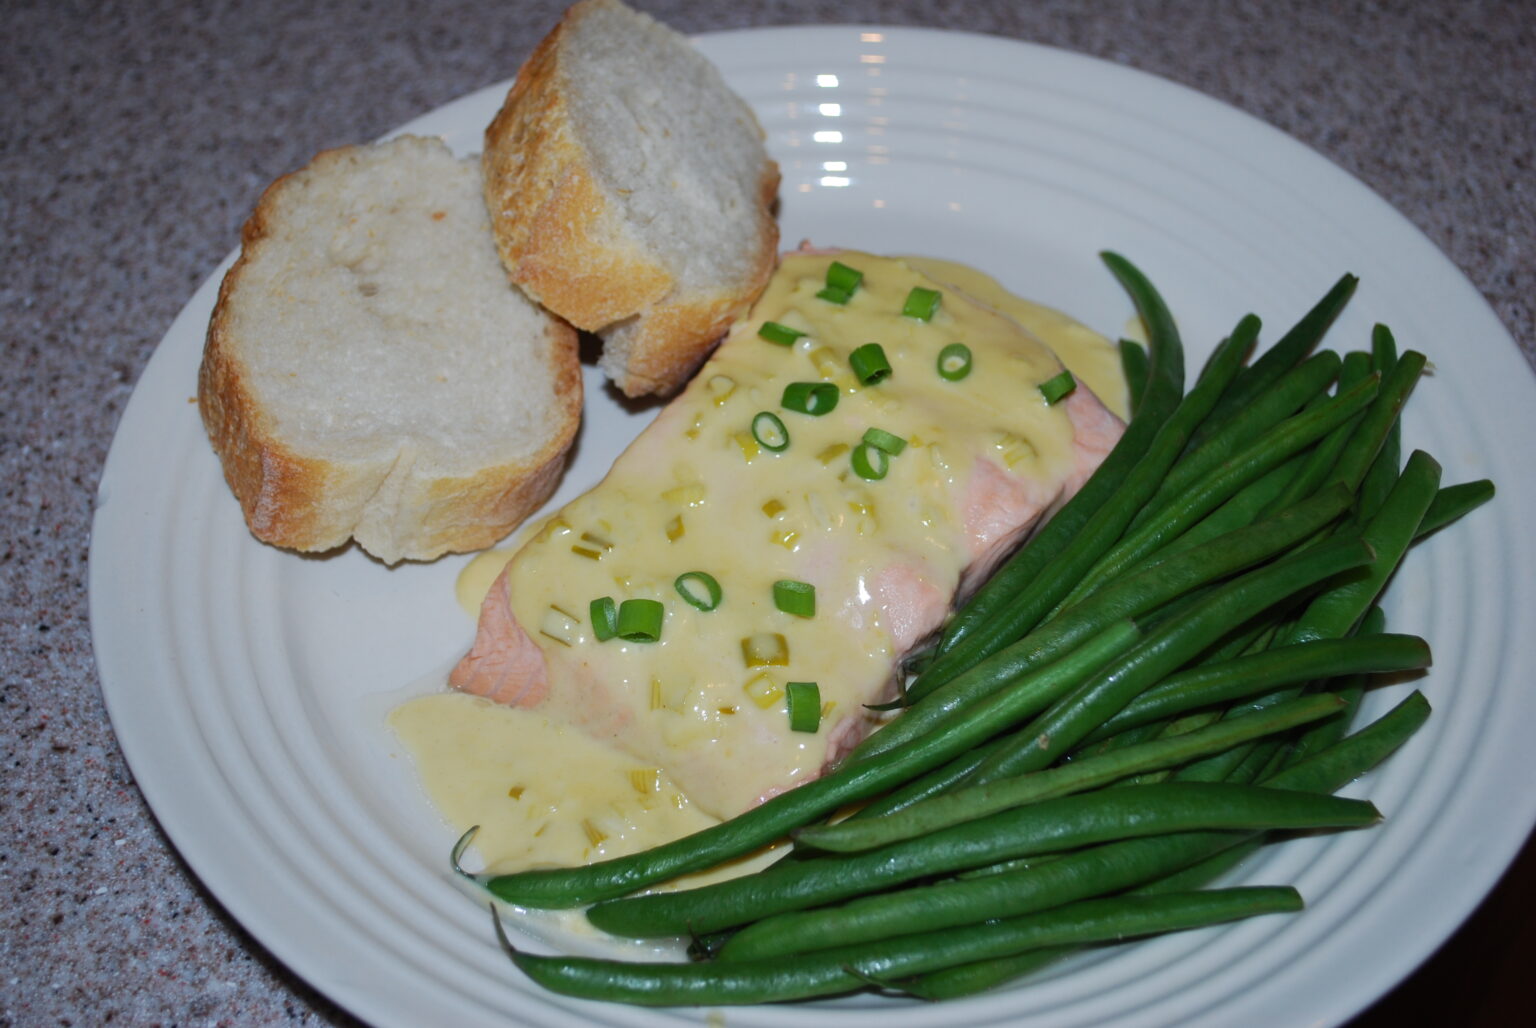 Easy week night dinner recipe for poached salmon with mustard creme personal chef service alpharetta johns creek